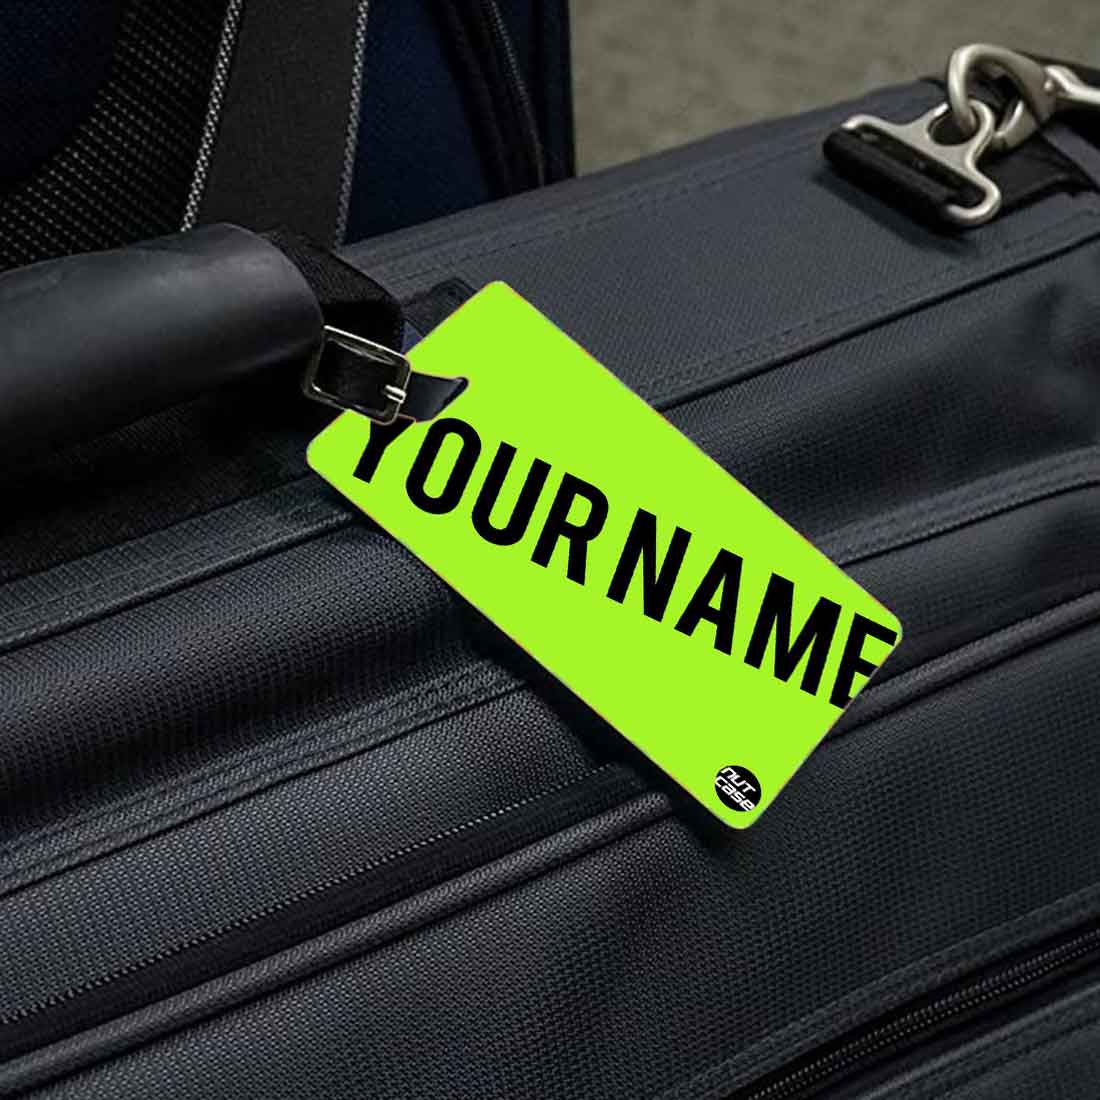 Personalized Travel Tags for Travel Set of 2 Add Name & Address